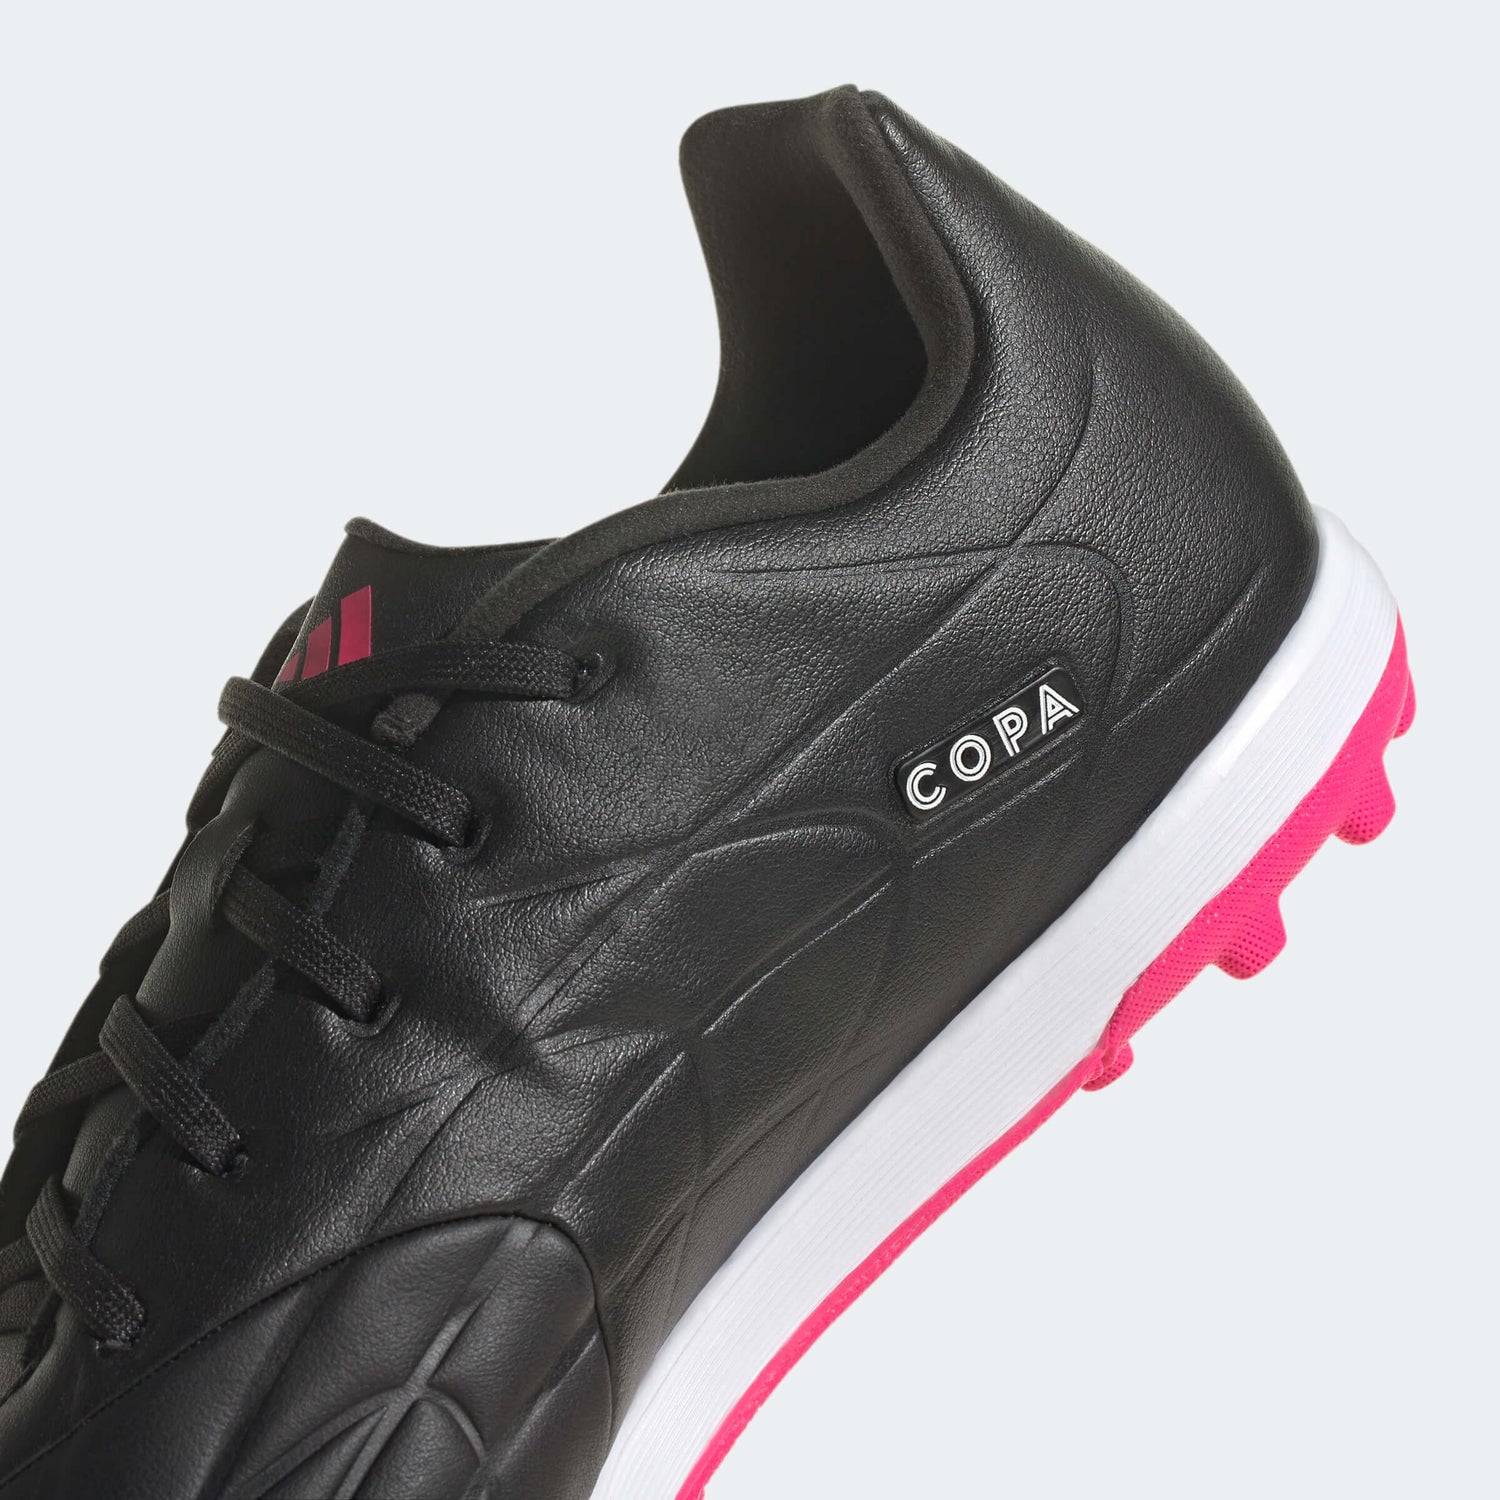 adidas Copa Pure.3 Turf - Own Your Football Pack (SP23) (Detail 2)